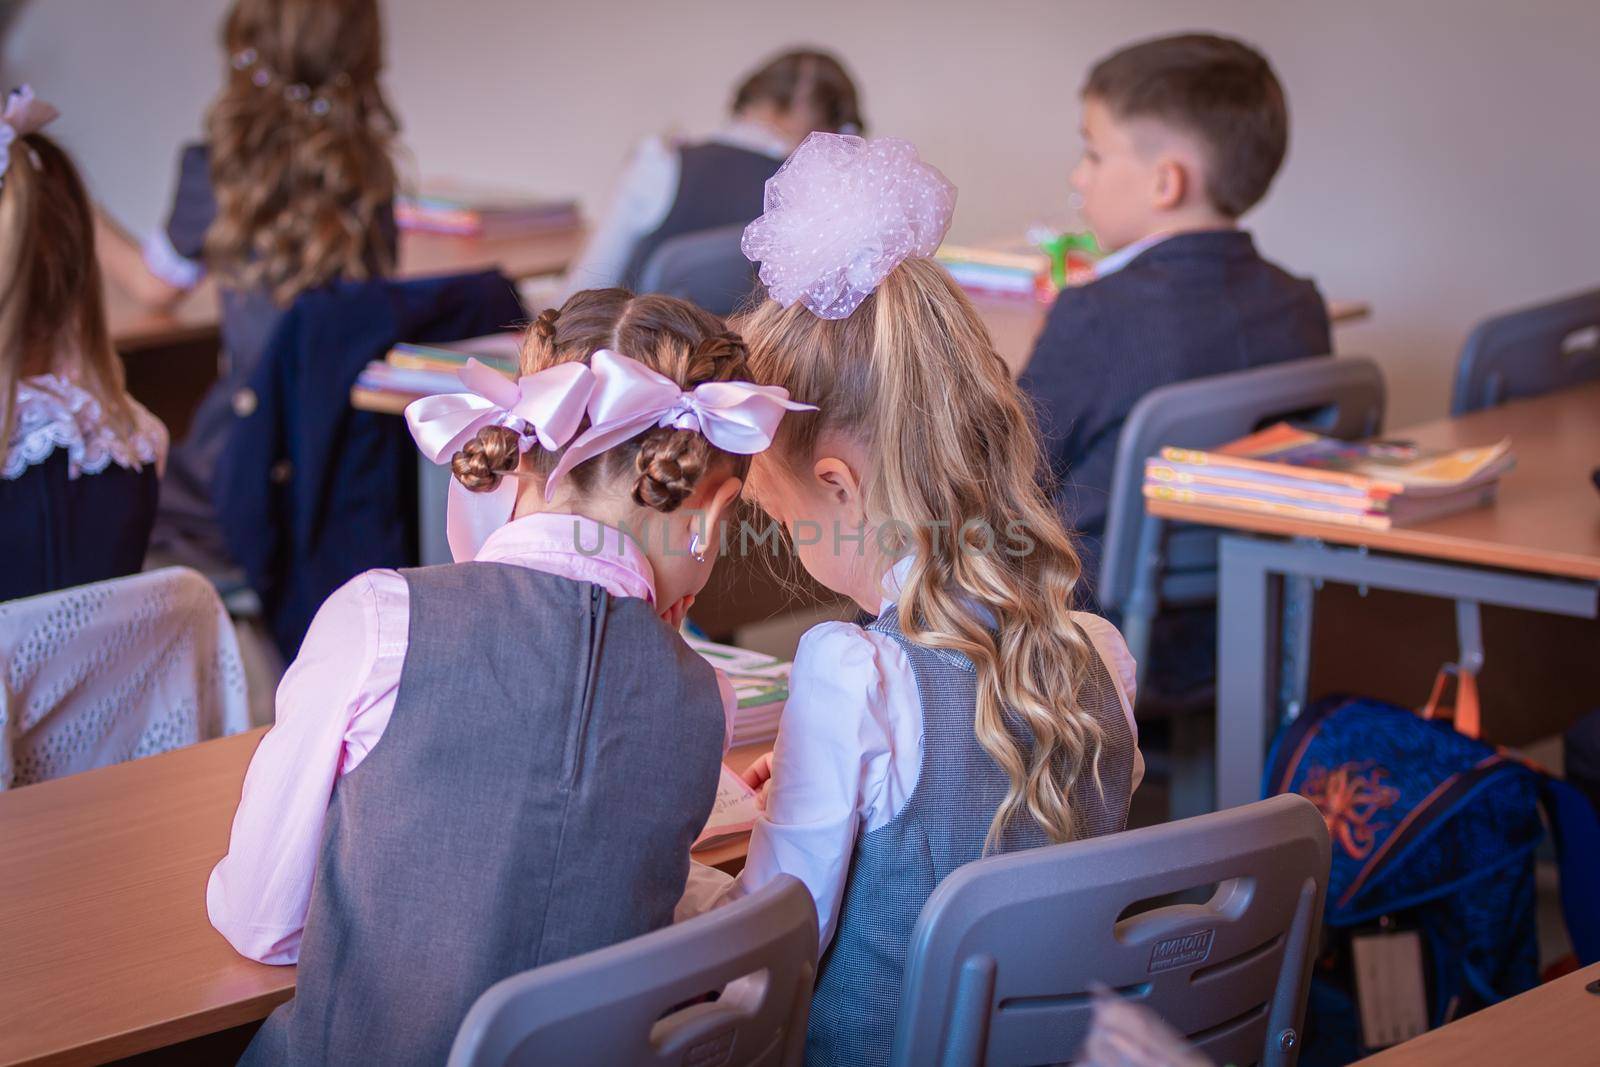 Children sit at their desks in class on September 1. Moscow, Russia, September 2, 2019 by Yurich32